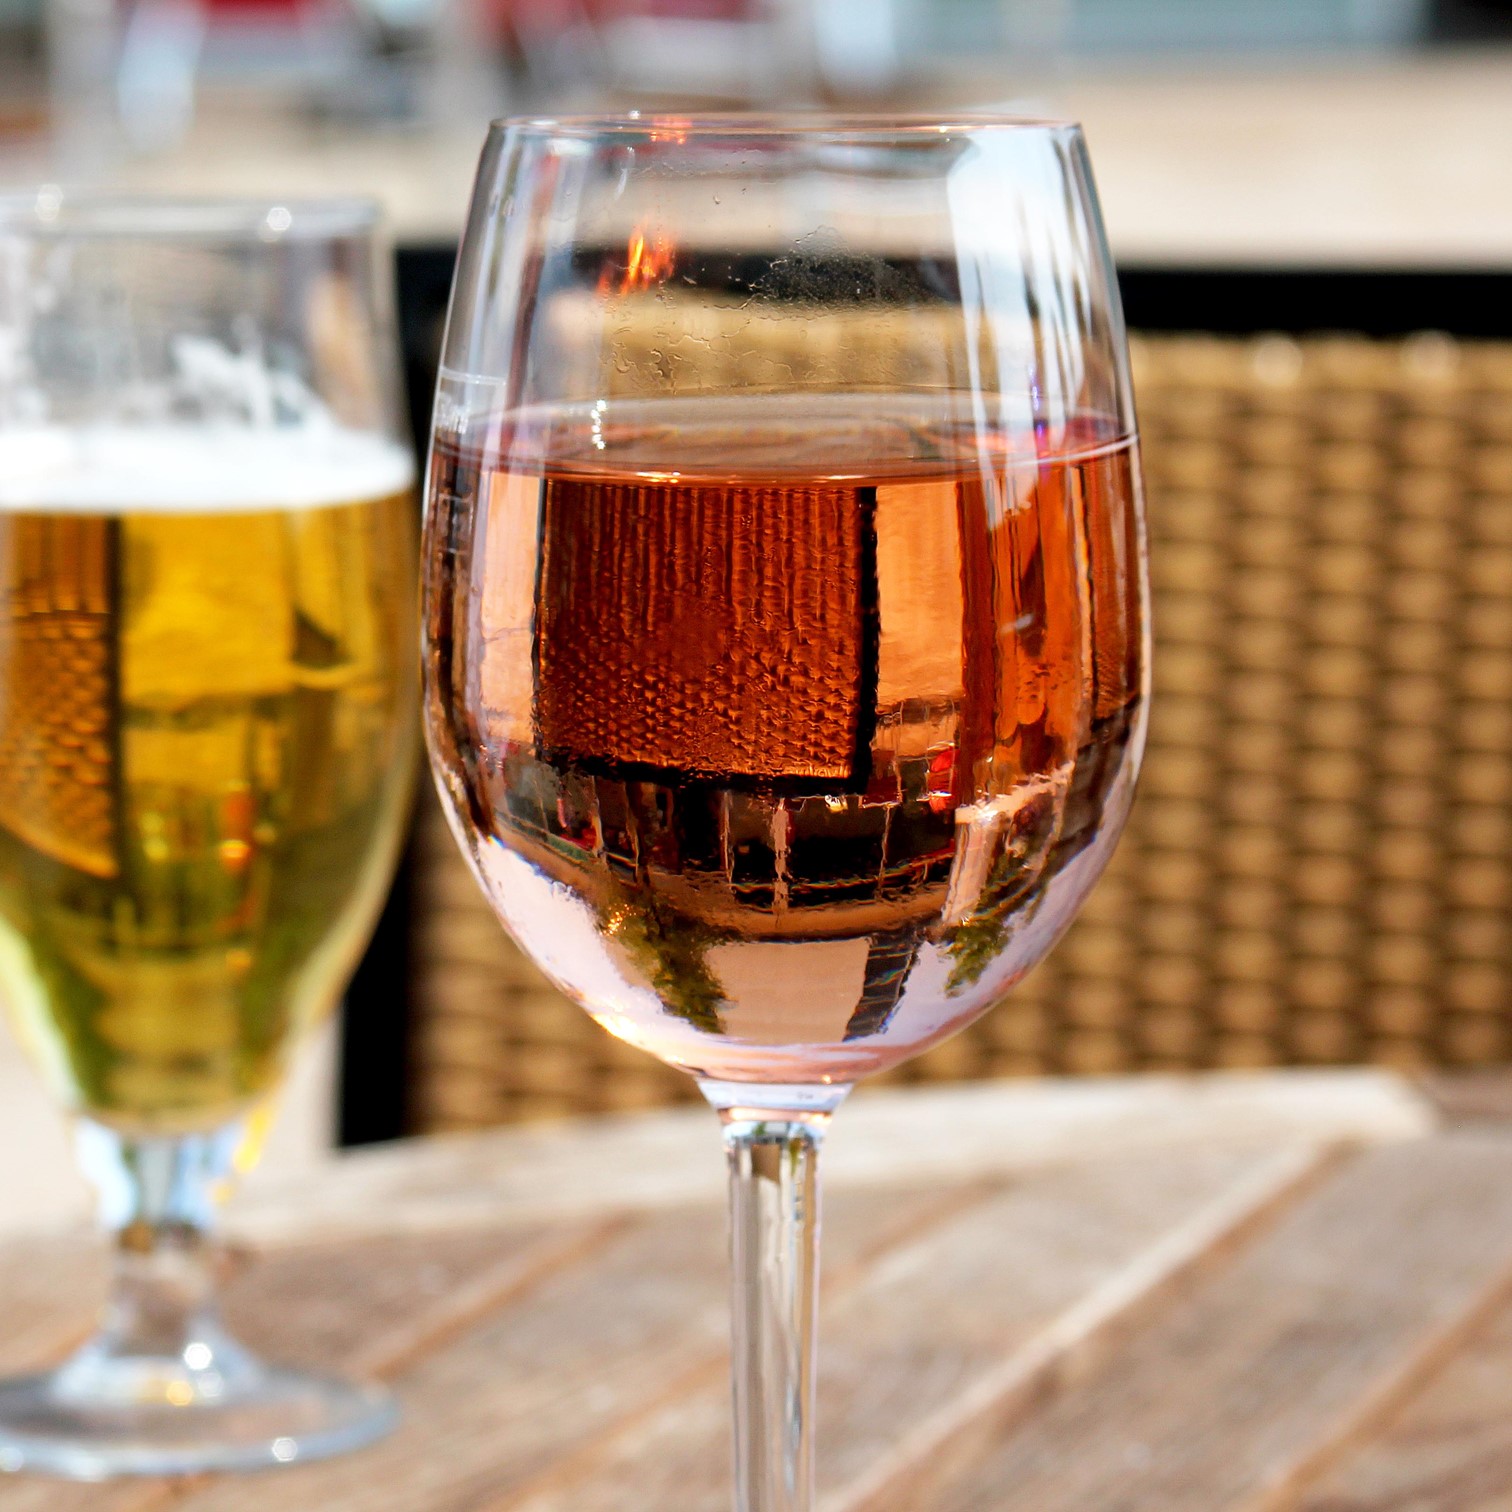 Rose  - Why is wine brand awareness declining in Australia?